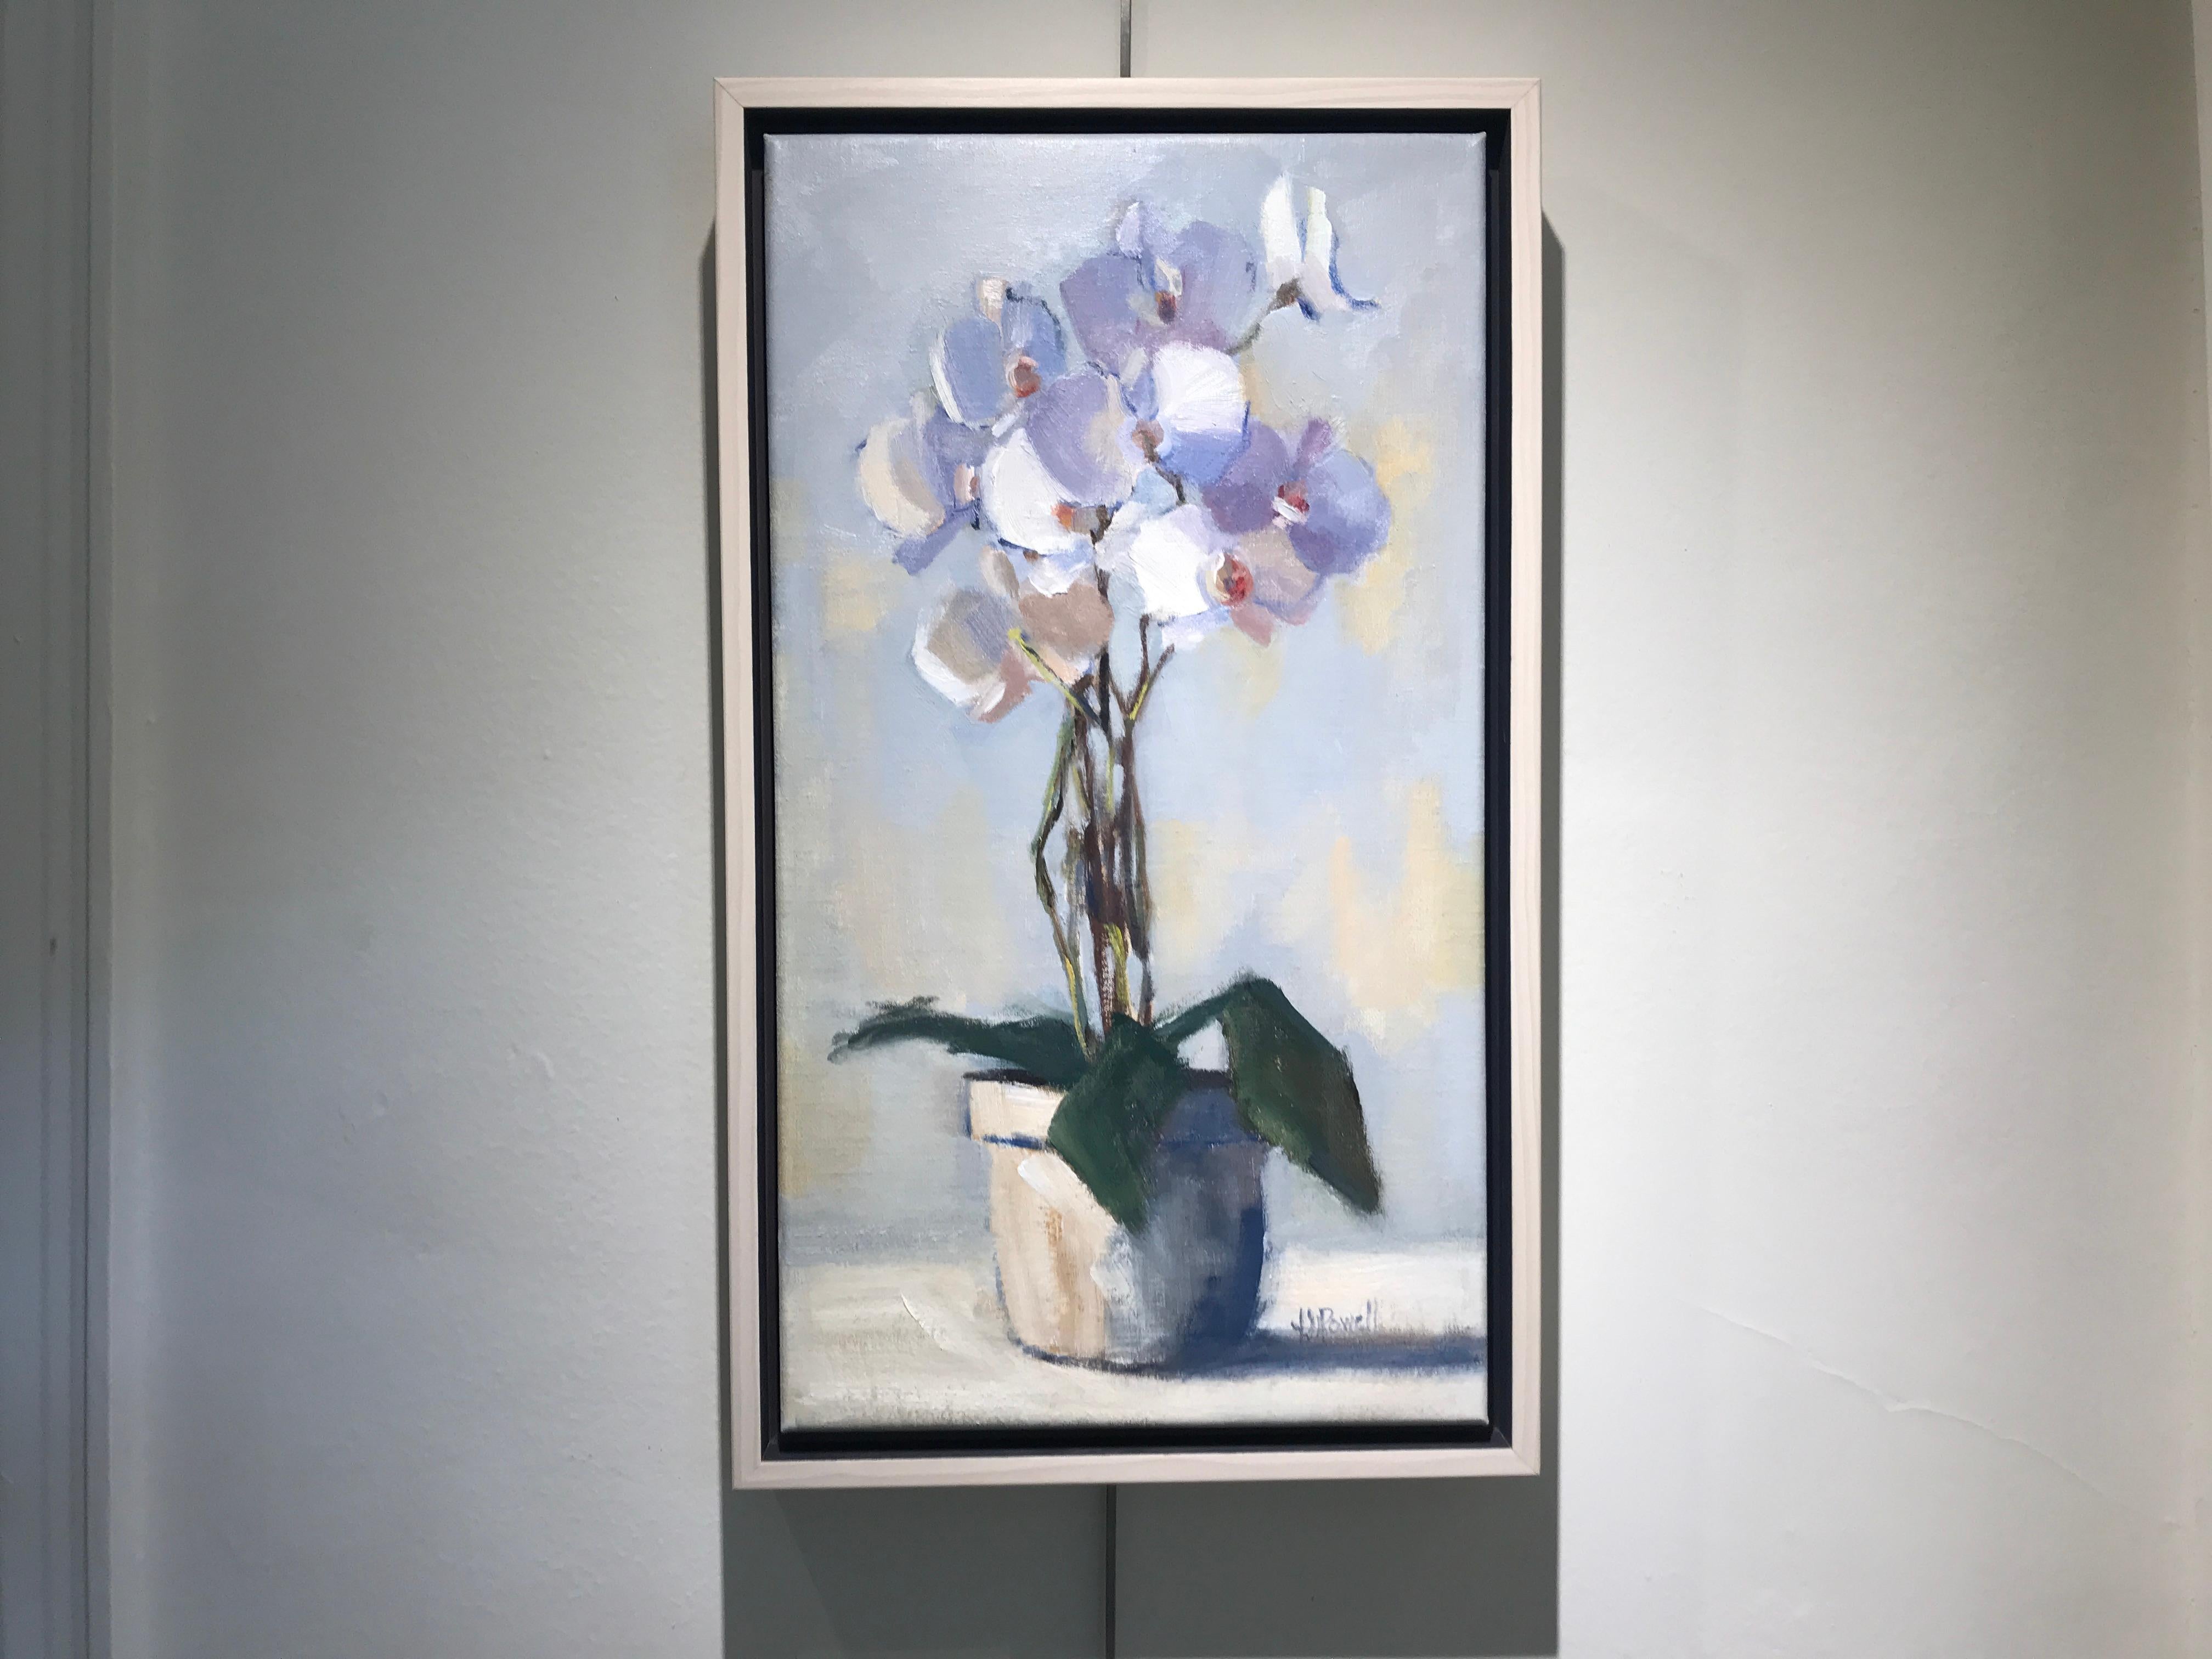 Into the Light, Lesley Powell Framed Floral Oil on Linen Still-life Painting 1